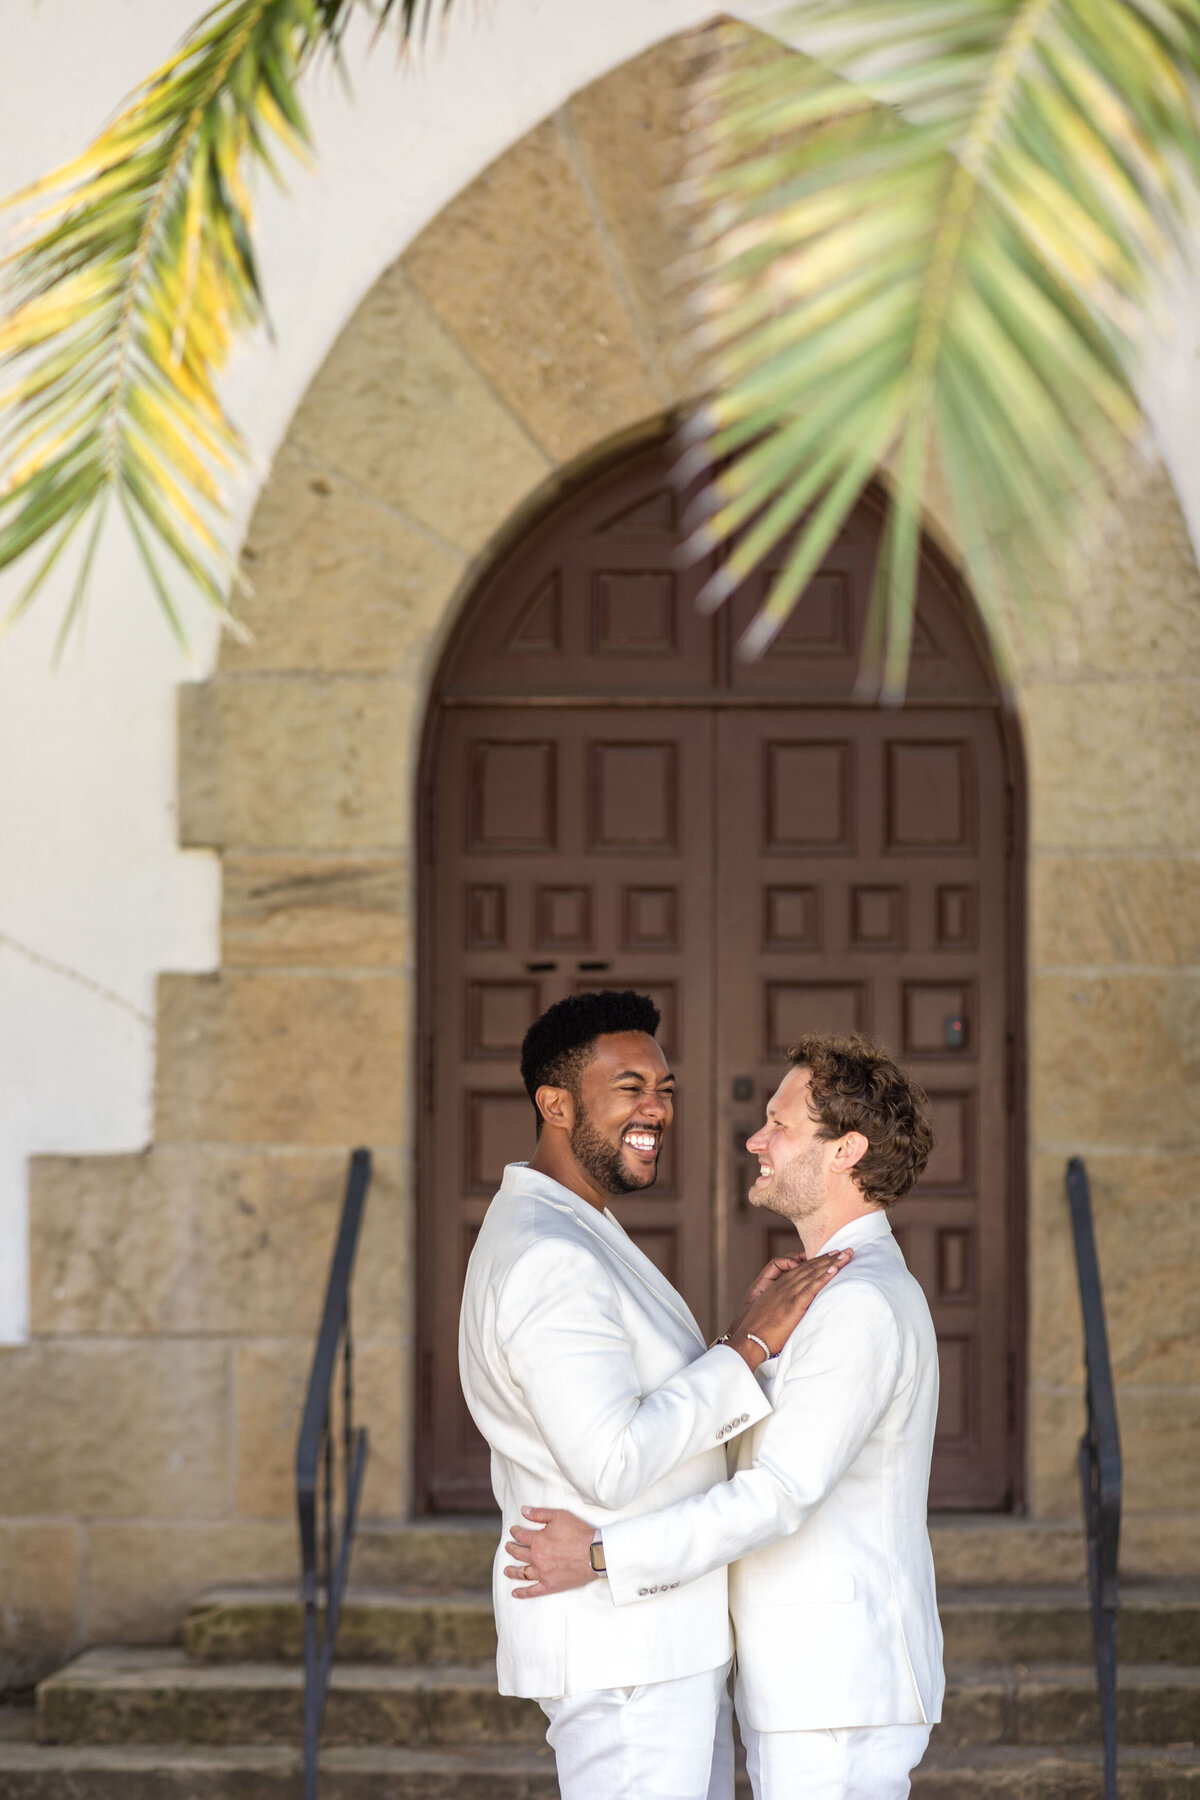 A couple standing outside a large arched door smiling.